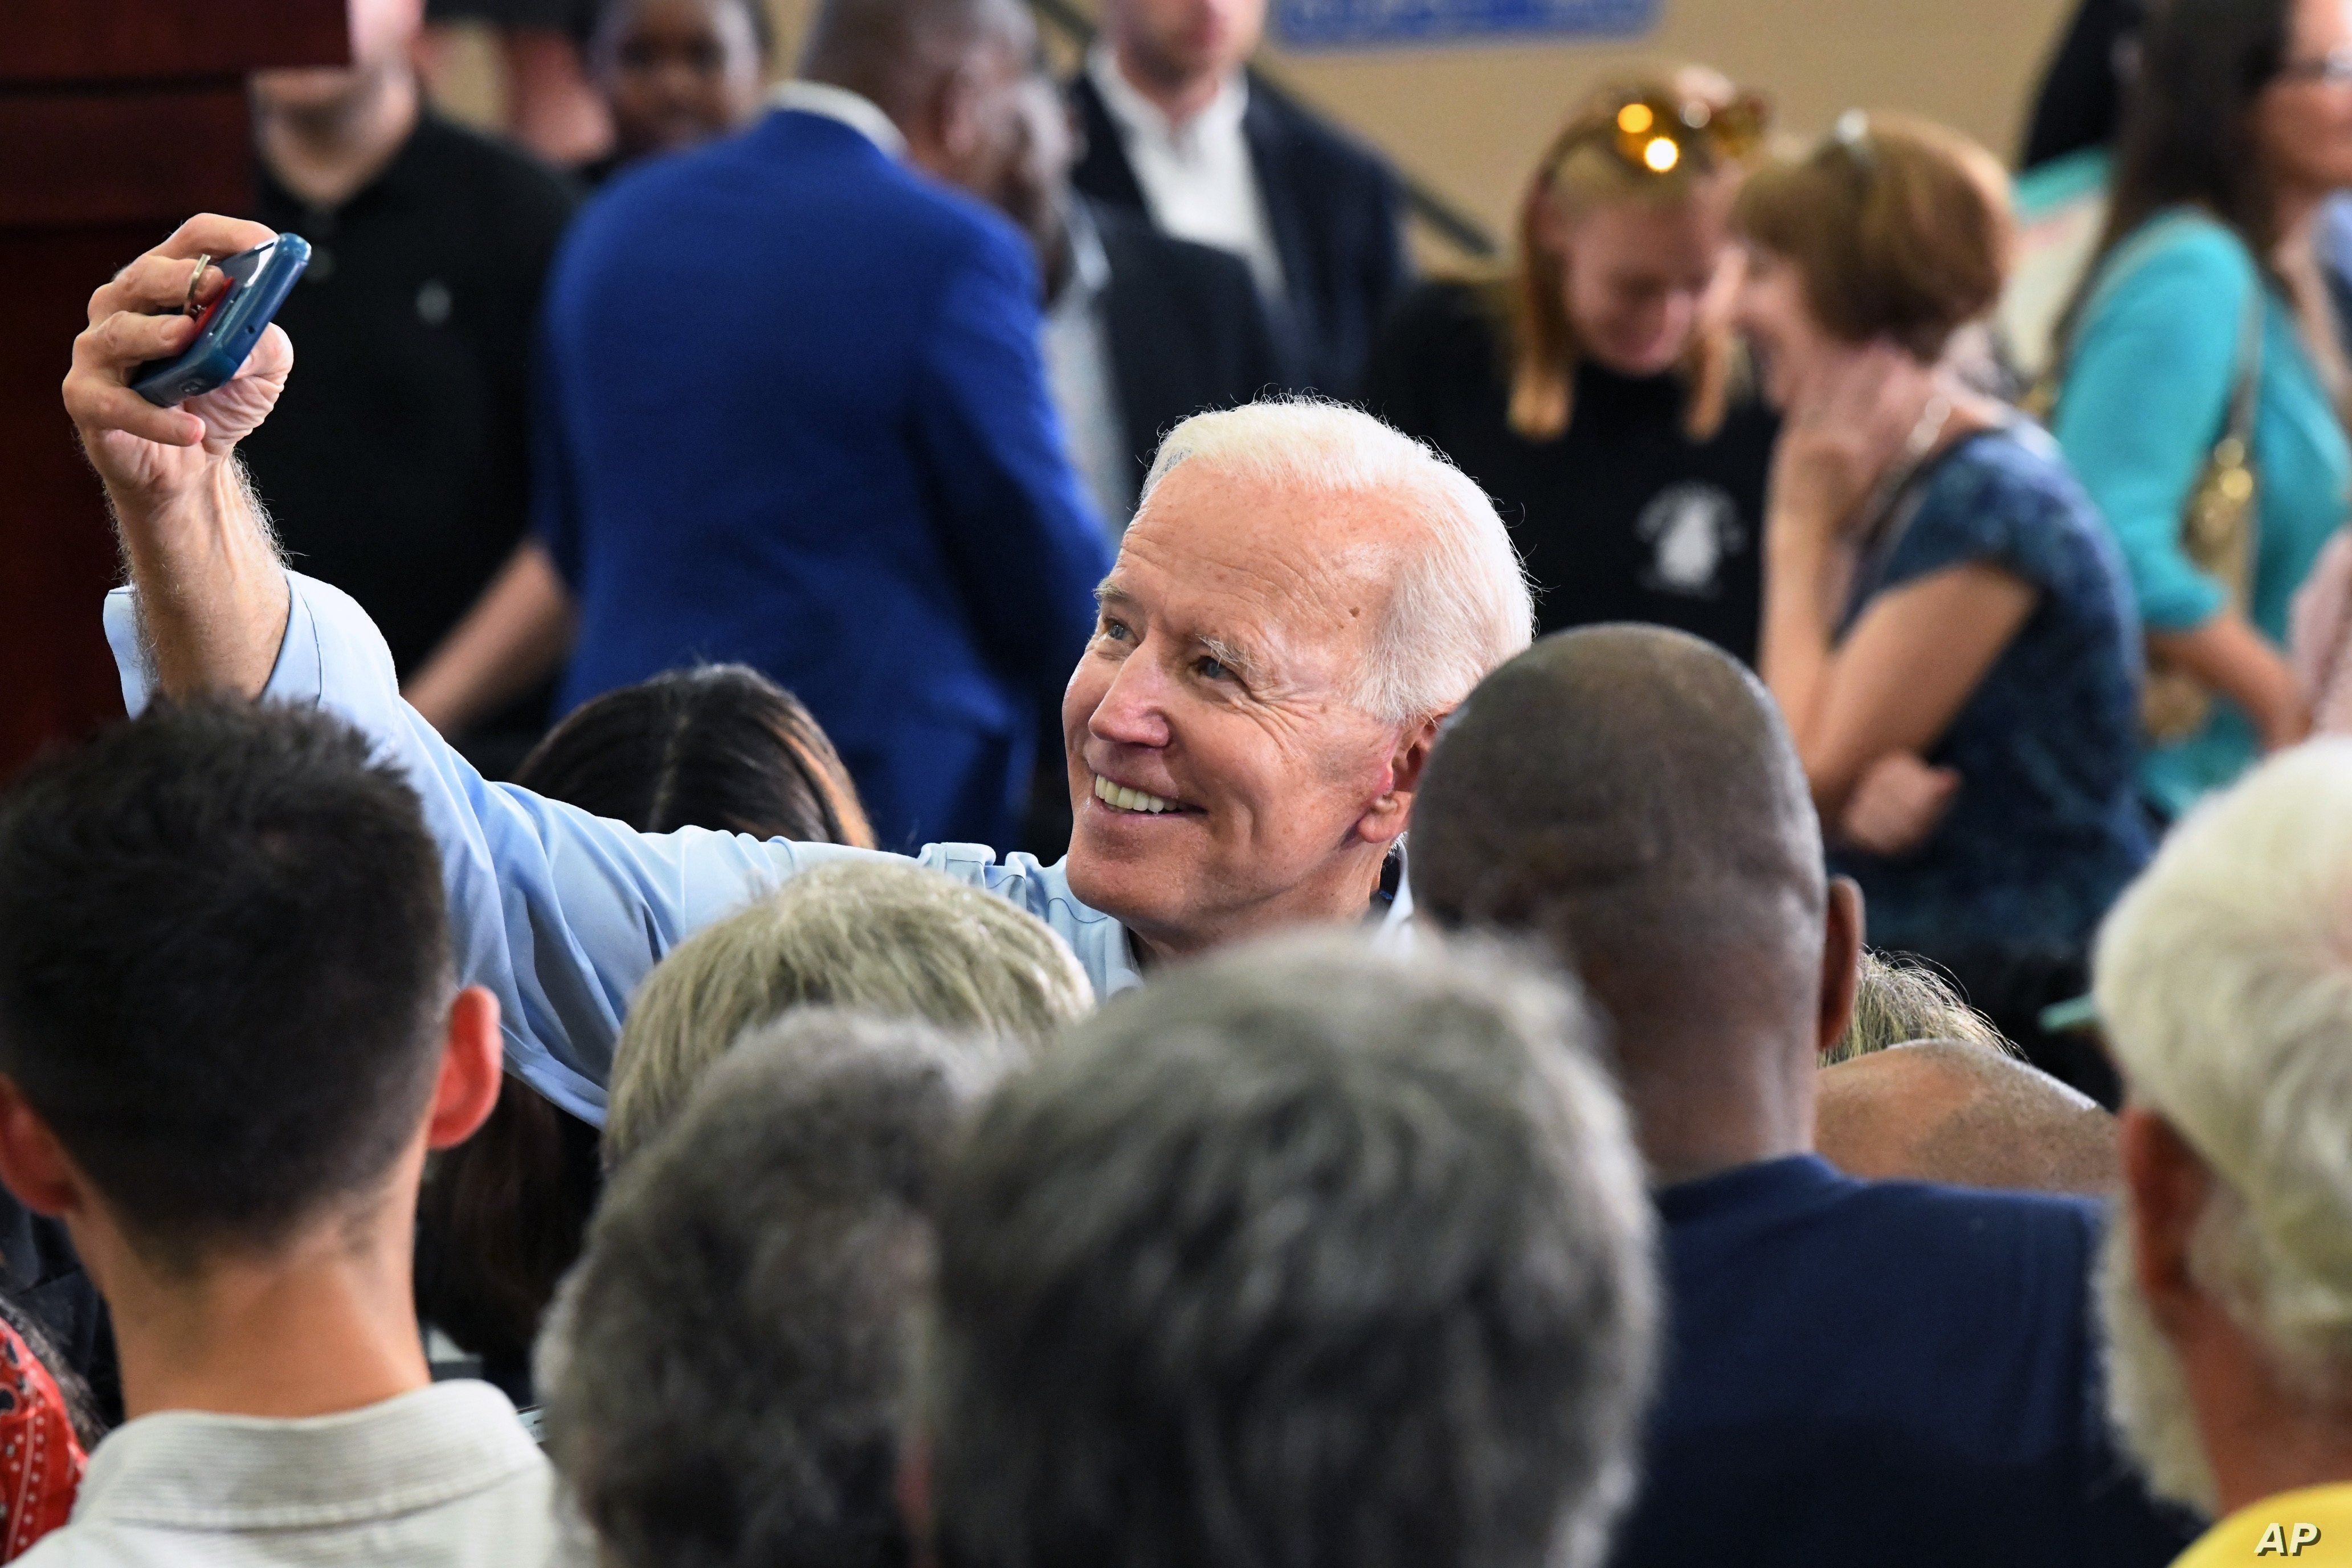 Former Vice President Joe Biden takes photos with supporters following the first rally of his 2020 campaign, May 4, 2019 in Columbia, S.C.